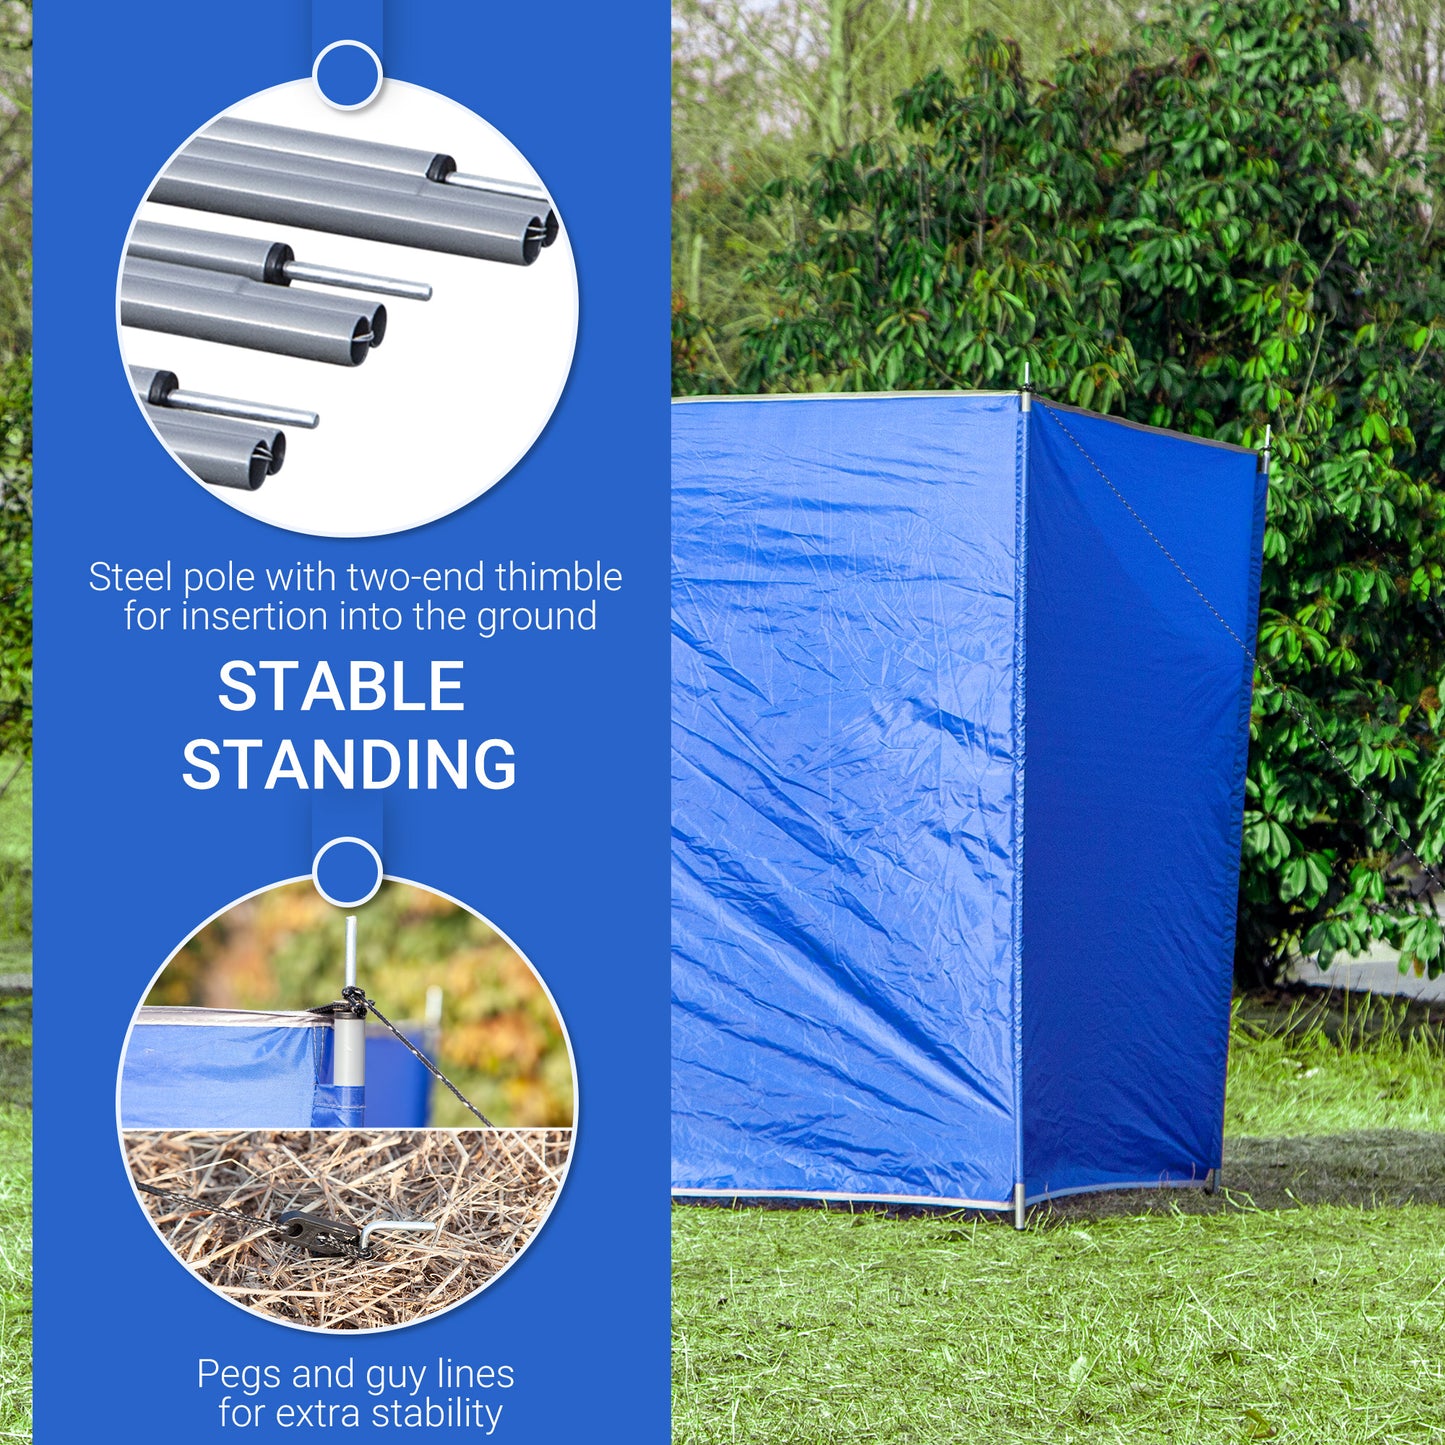 Outsunny Camping Windbreak, Foldable Portable Wind Blocker w/ Carry Bag and Steel Poles, Beach Sun Screen Shelter Privacy Wall, 540cm x 150cm